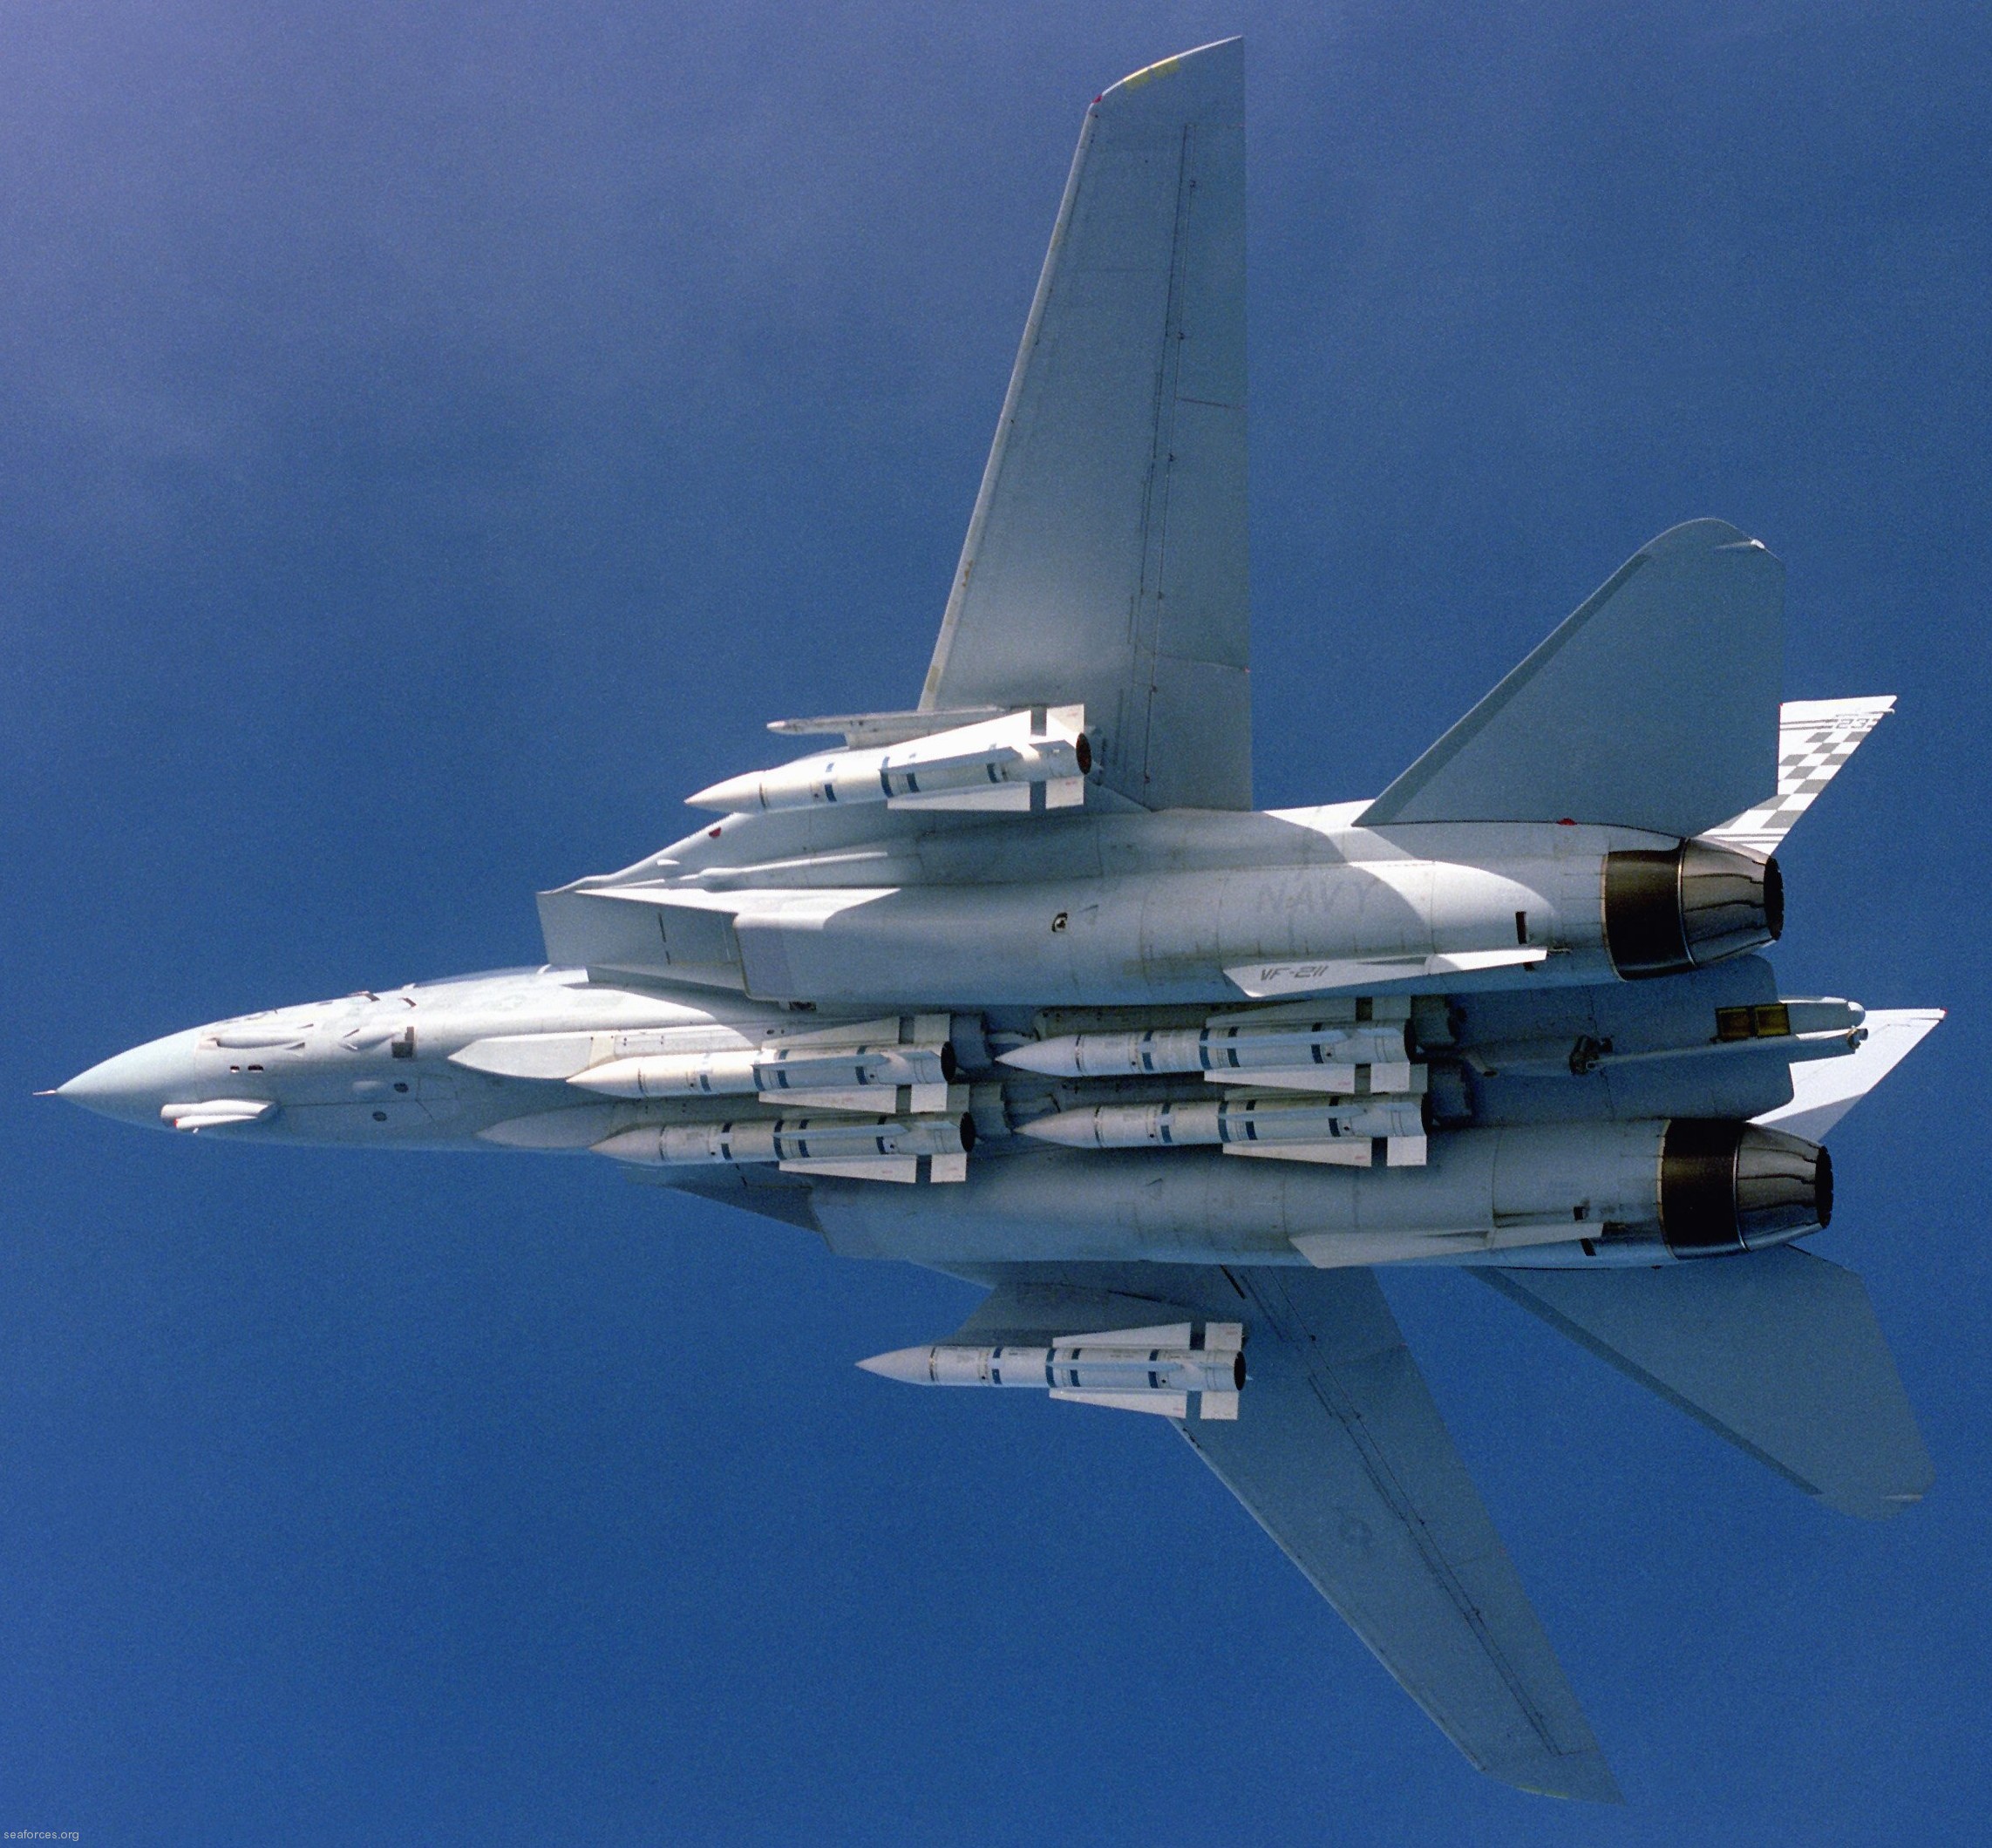 vf-211 fighting checkmates fighter squadron f-14a tomcat us navy carrier air wing cvw-9 33 aim-54 phoenix aam missile